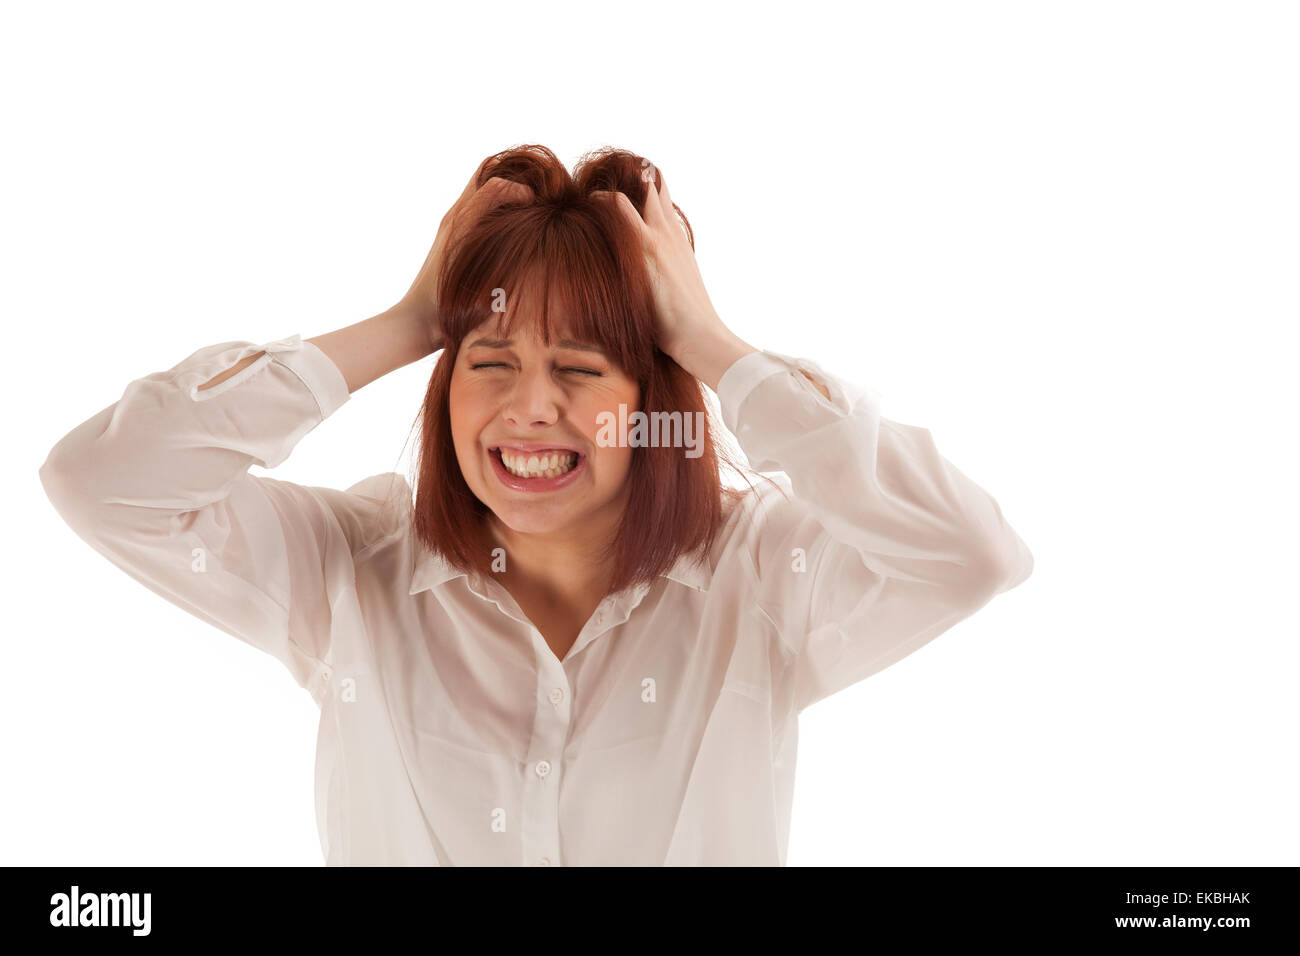 Frustrated woman tearing at her hair Stock Photo